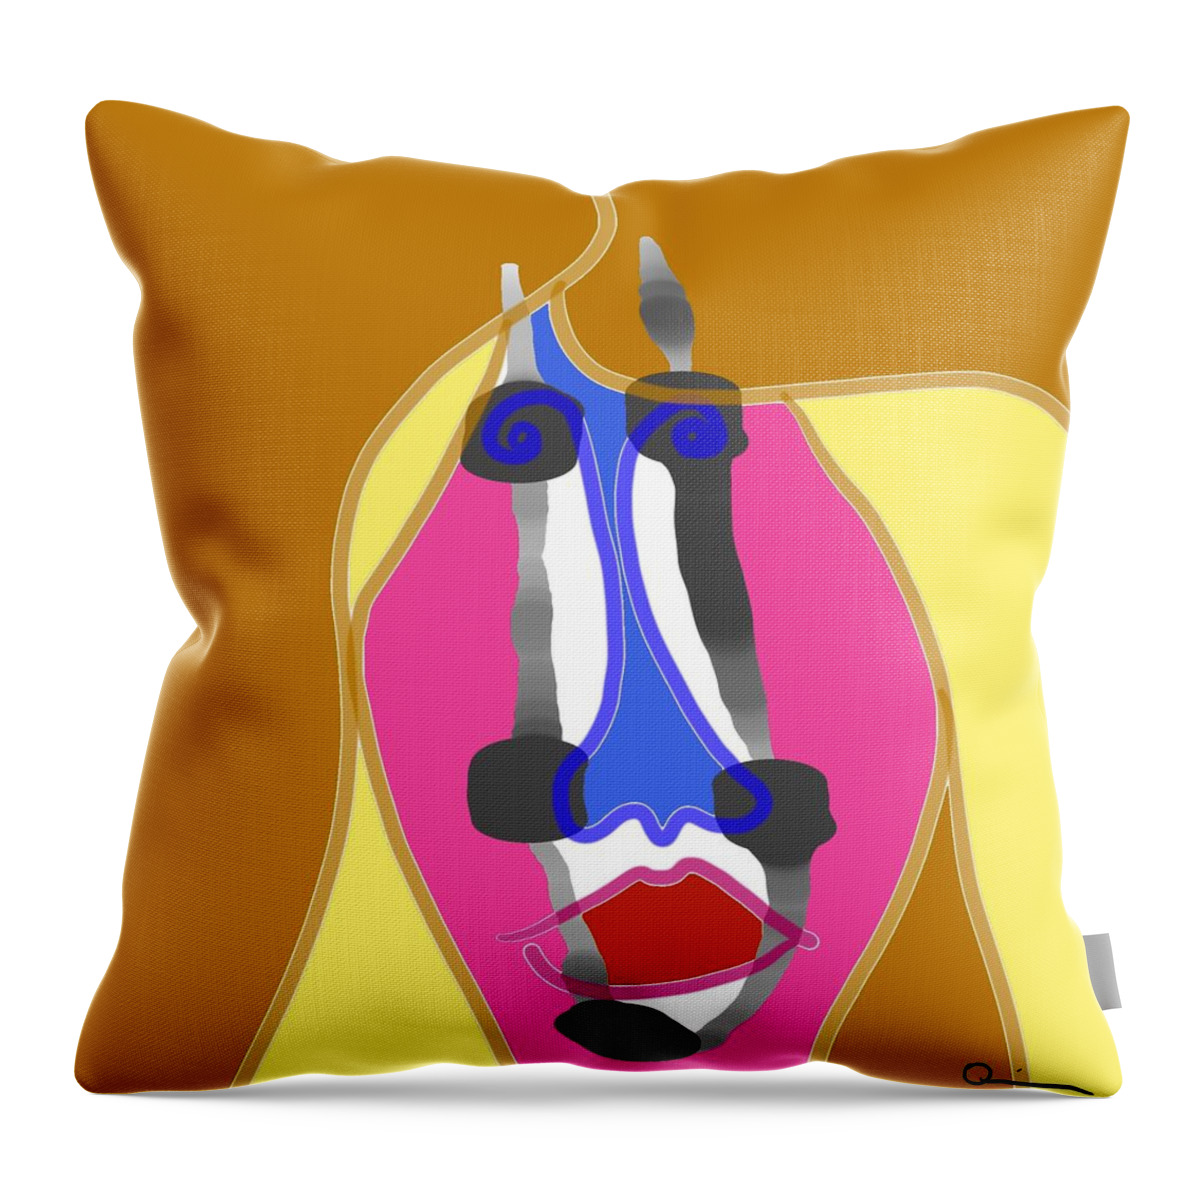 Glamour Throw Pillow featuring the digital art Makeup 2 by Jeffrey Quiros